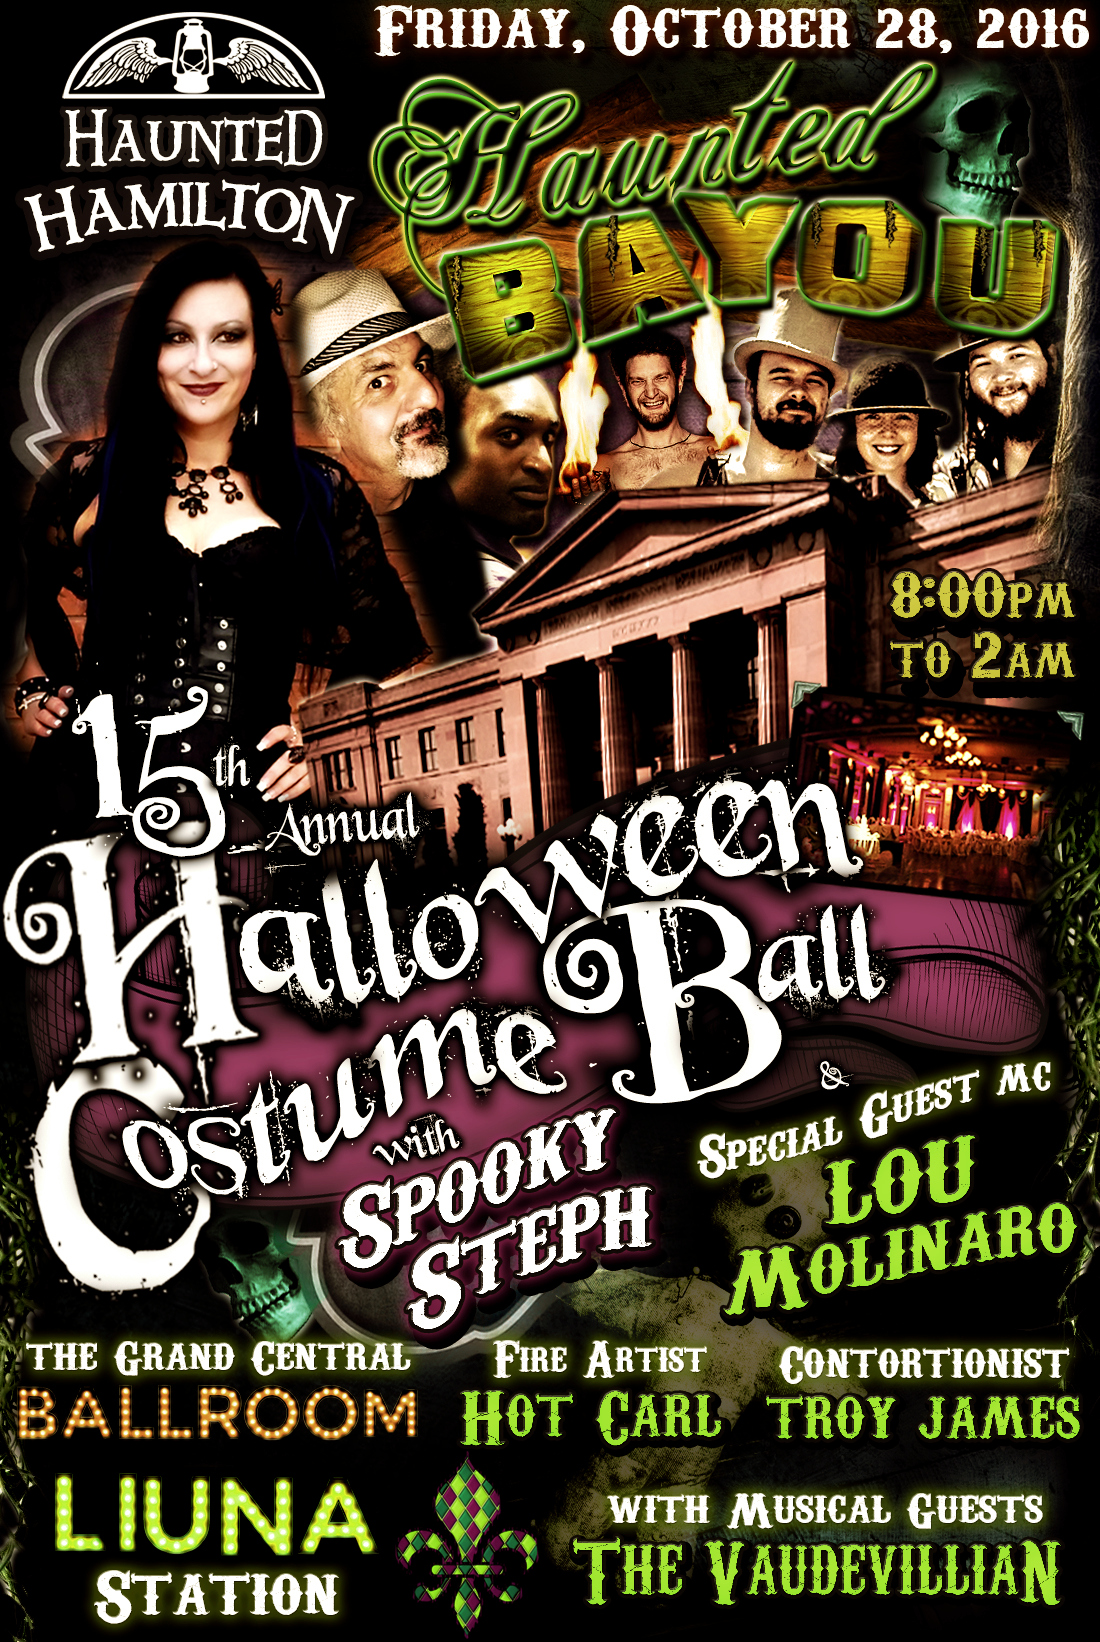 HAUNTED BAYOU // Haunted Hamilton's 15th Annual HALLOWEEN Costume Ball :: Hosted by Spooky Steph Lechniak in the Grand Central Ballroom at LIUNA STATION on Friday, October 28, 2016 // Hamilton, Ontario, Canada